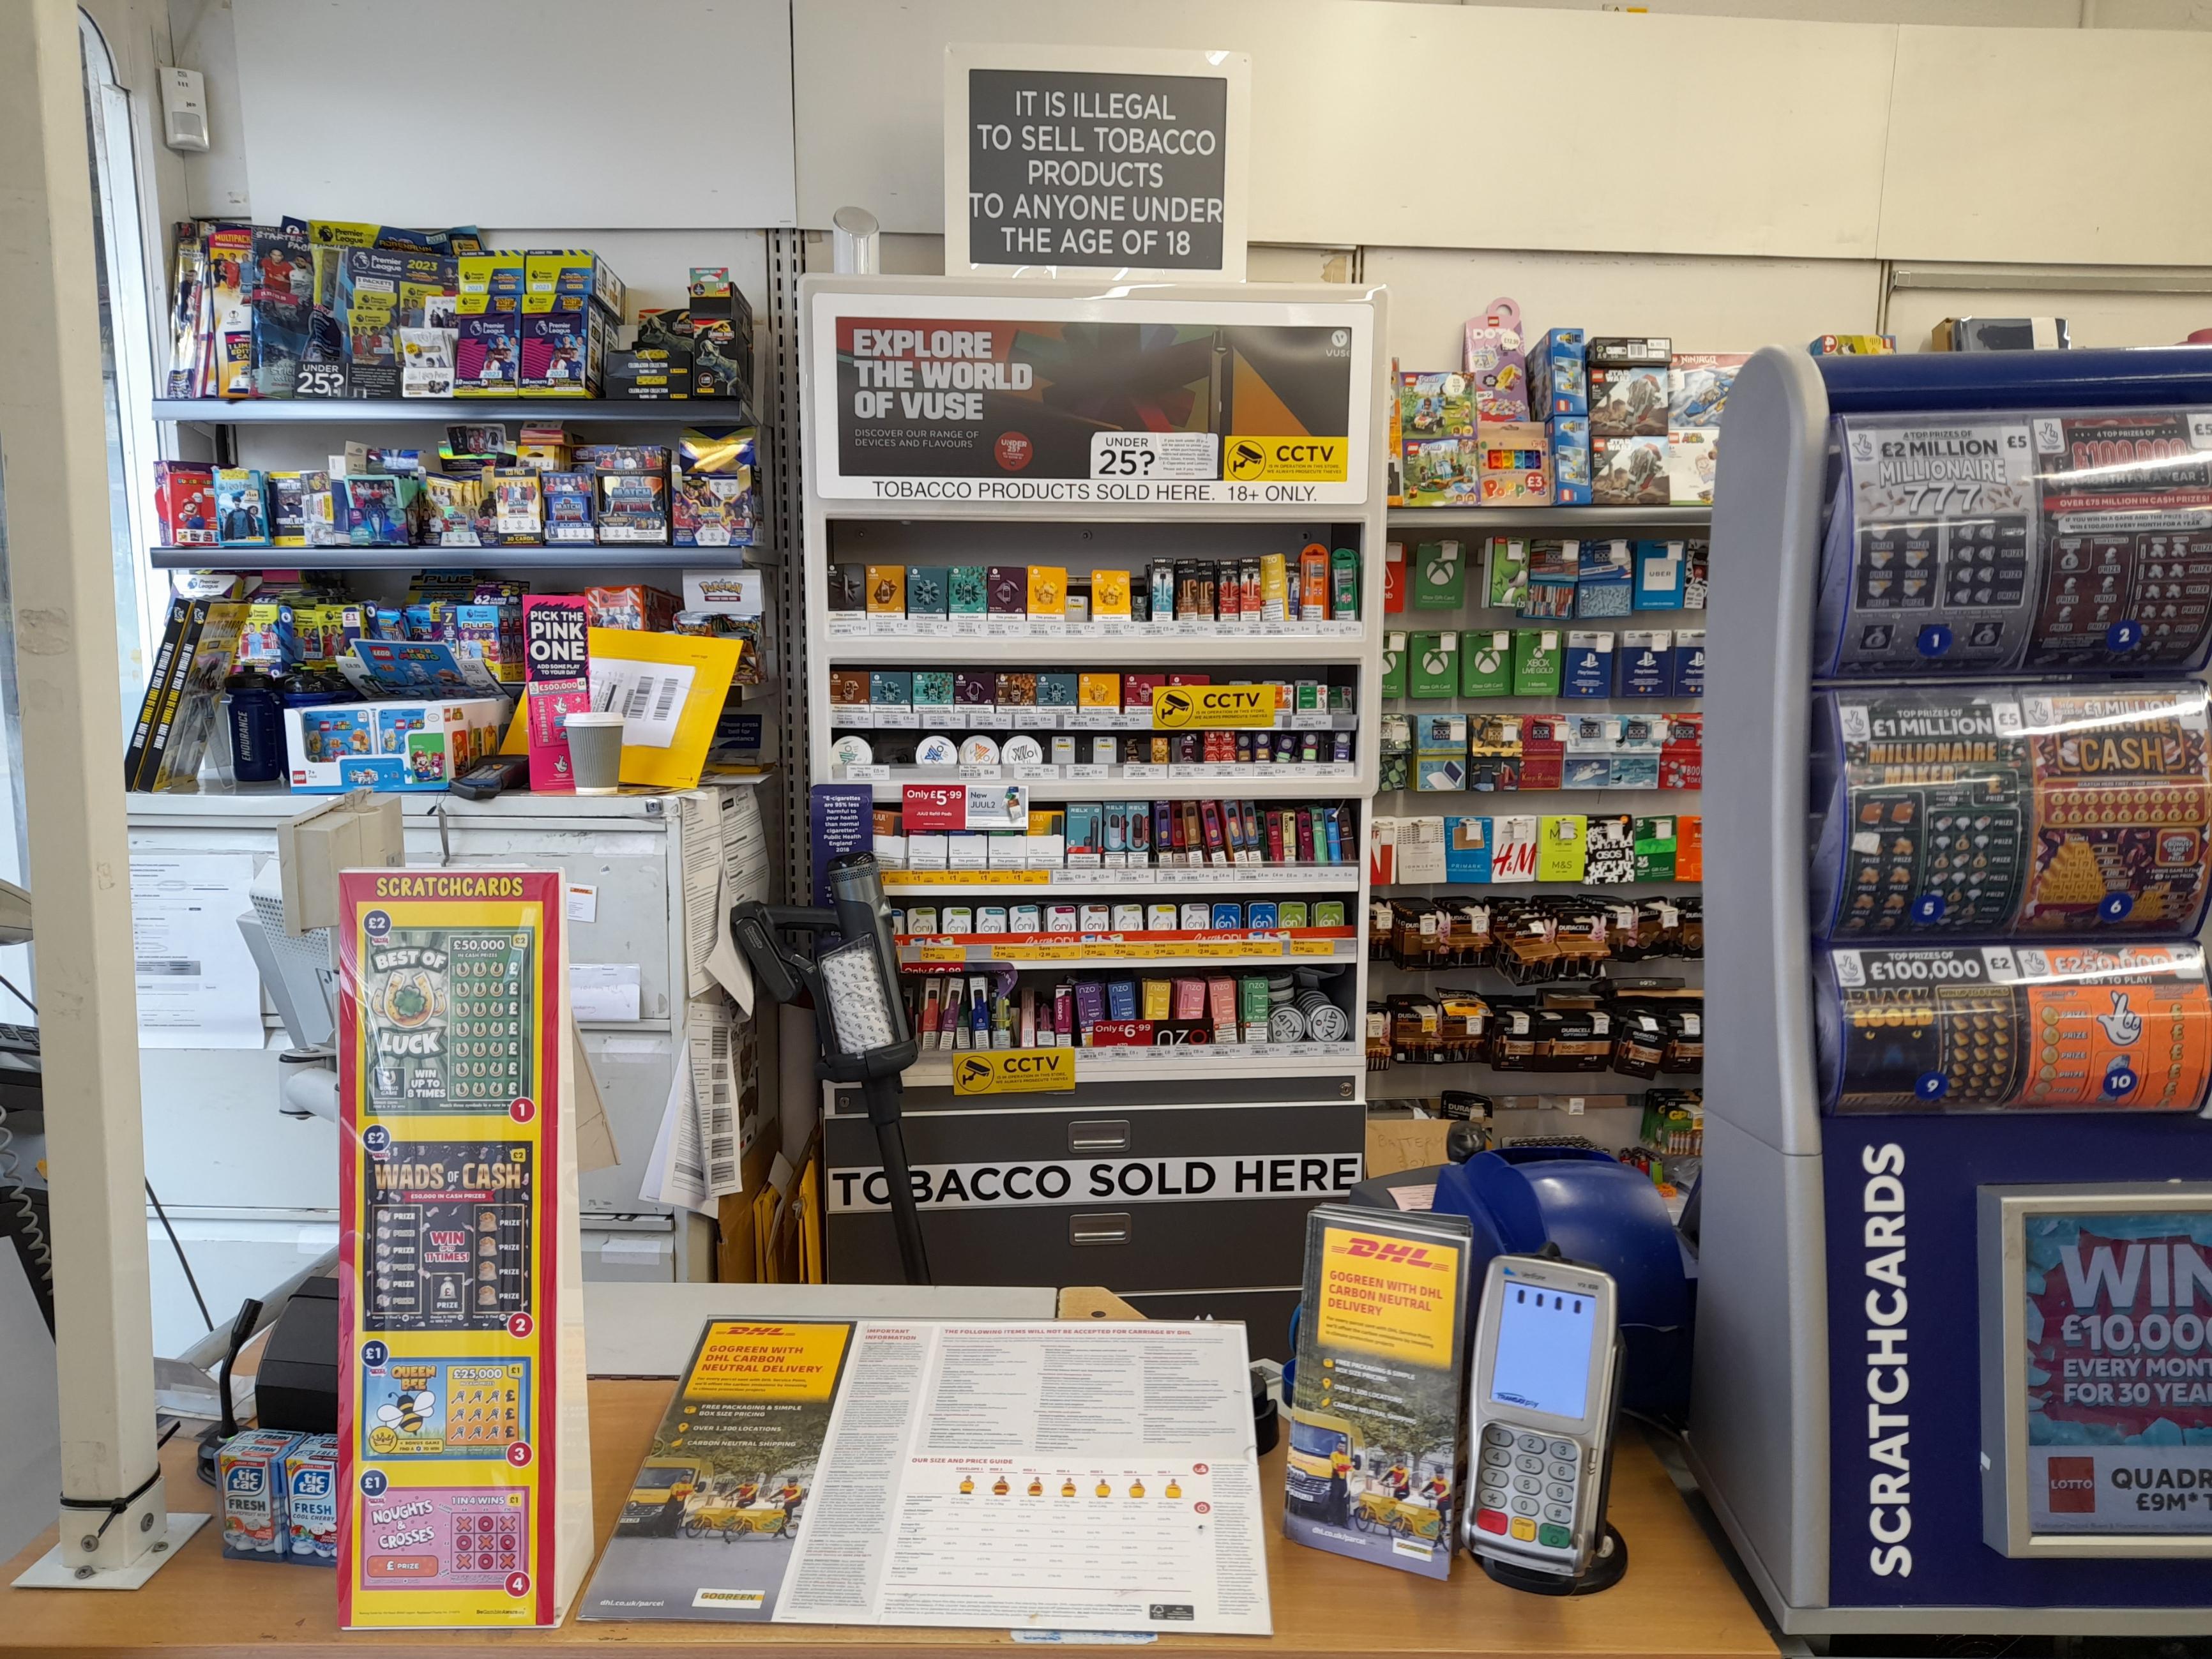 Images DHL Express Service Point (WHSmith Whitchurch)